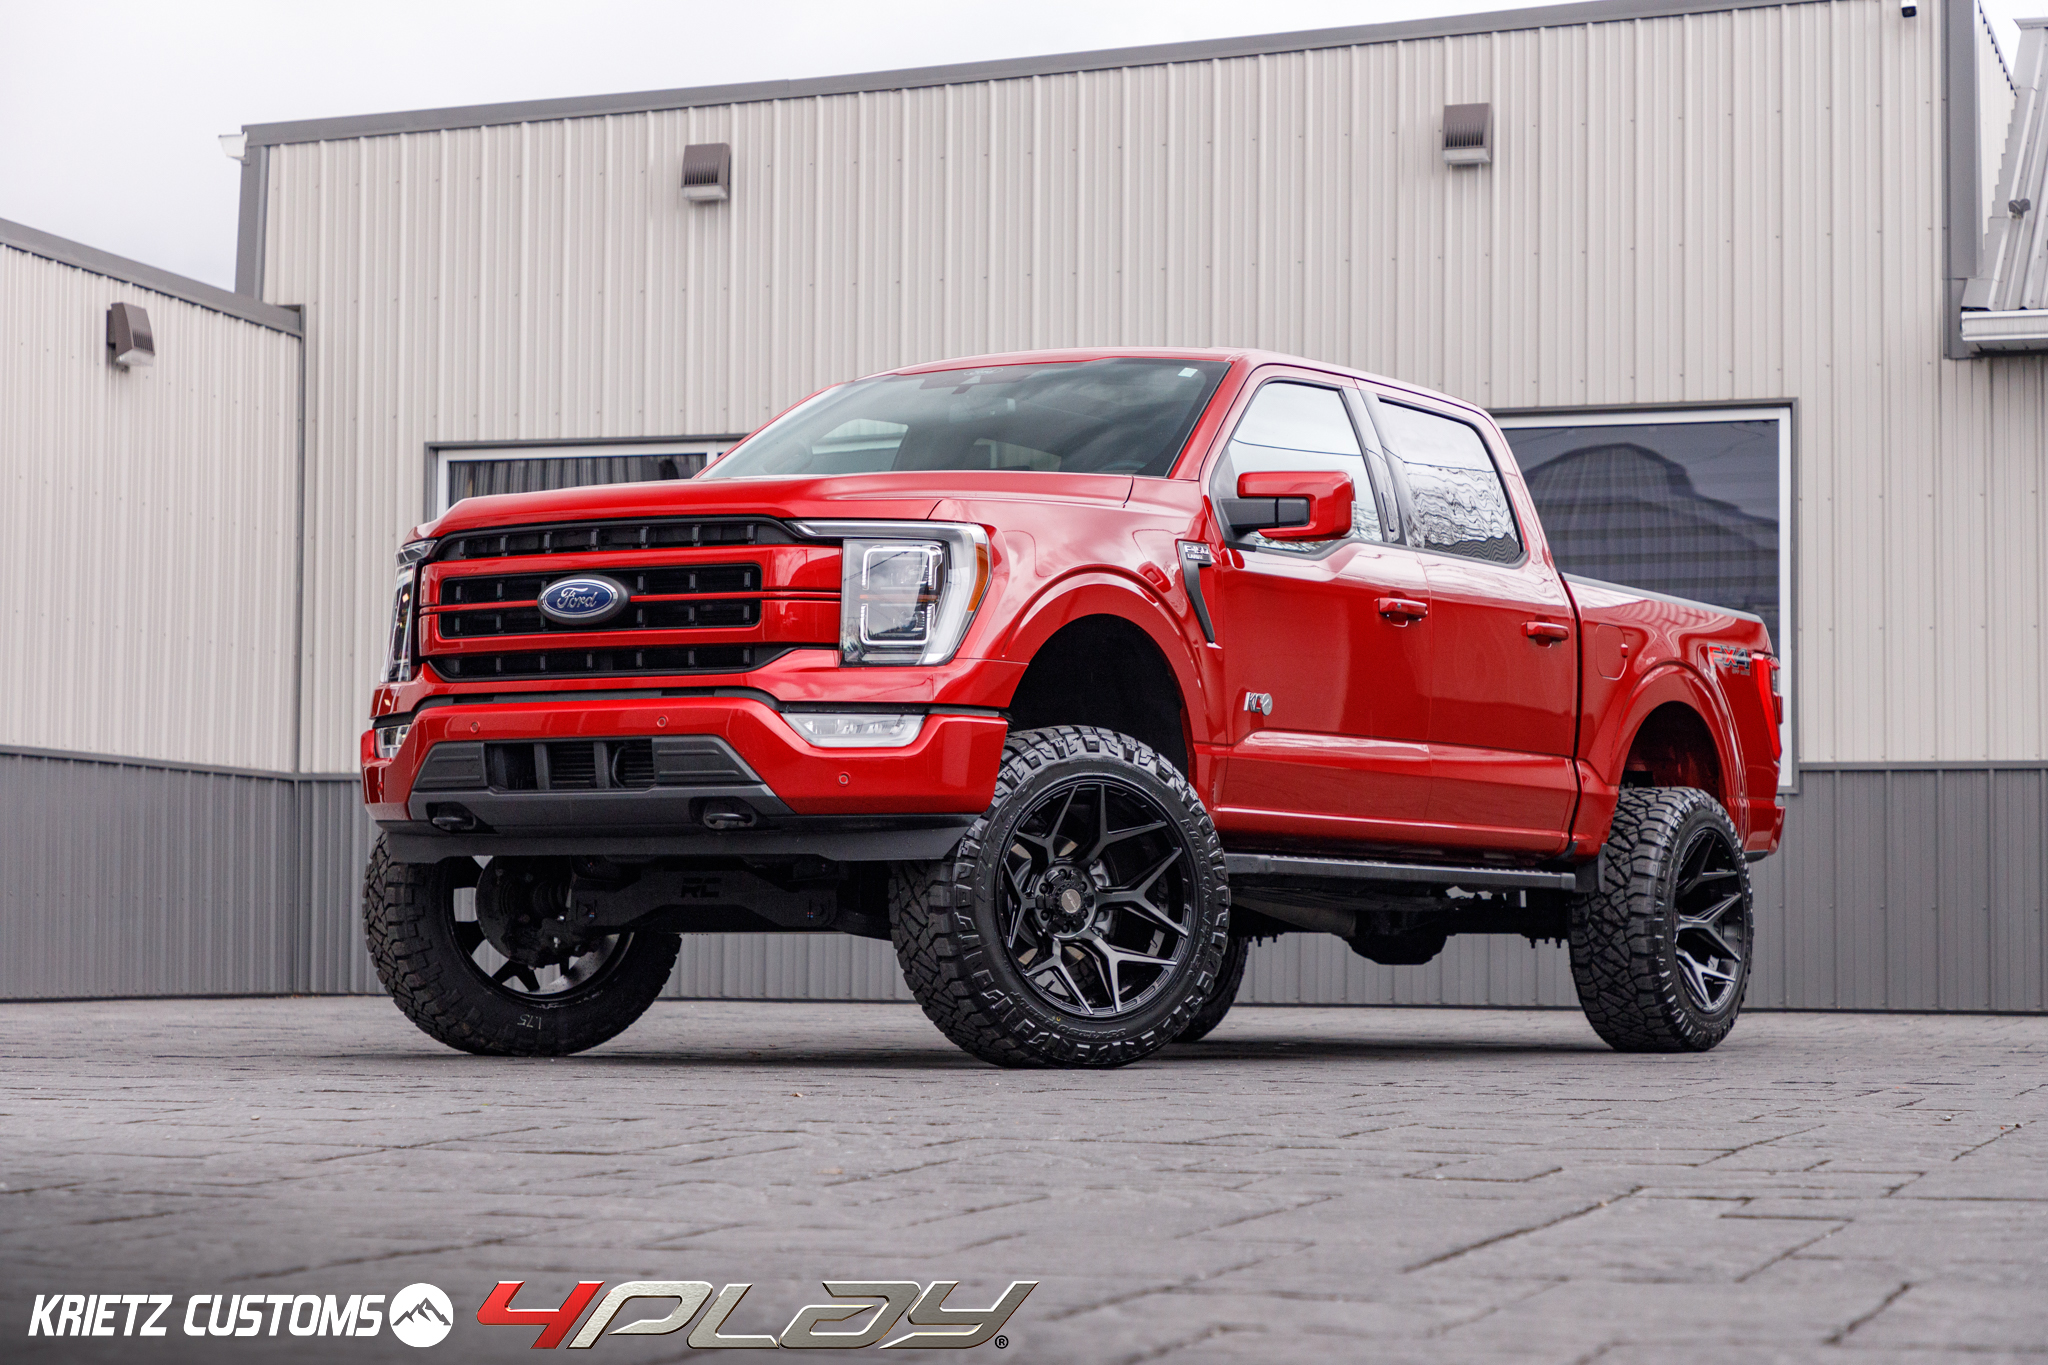 FORD F150 4PLAY WHEELS RIMS 4P06 22X12 35X12.5X22 FURY TIRES 6 INCH ROUGH COUNTRY LIFT BY KRIETZ CUSTOMS 2